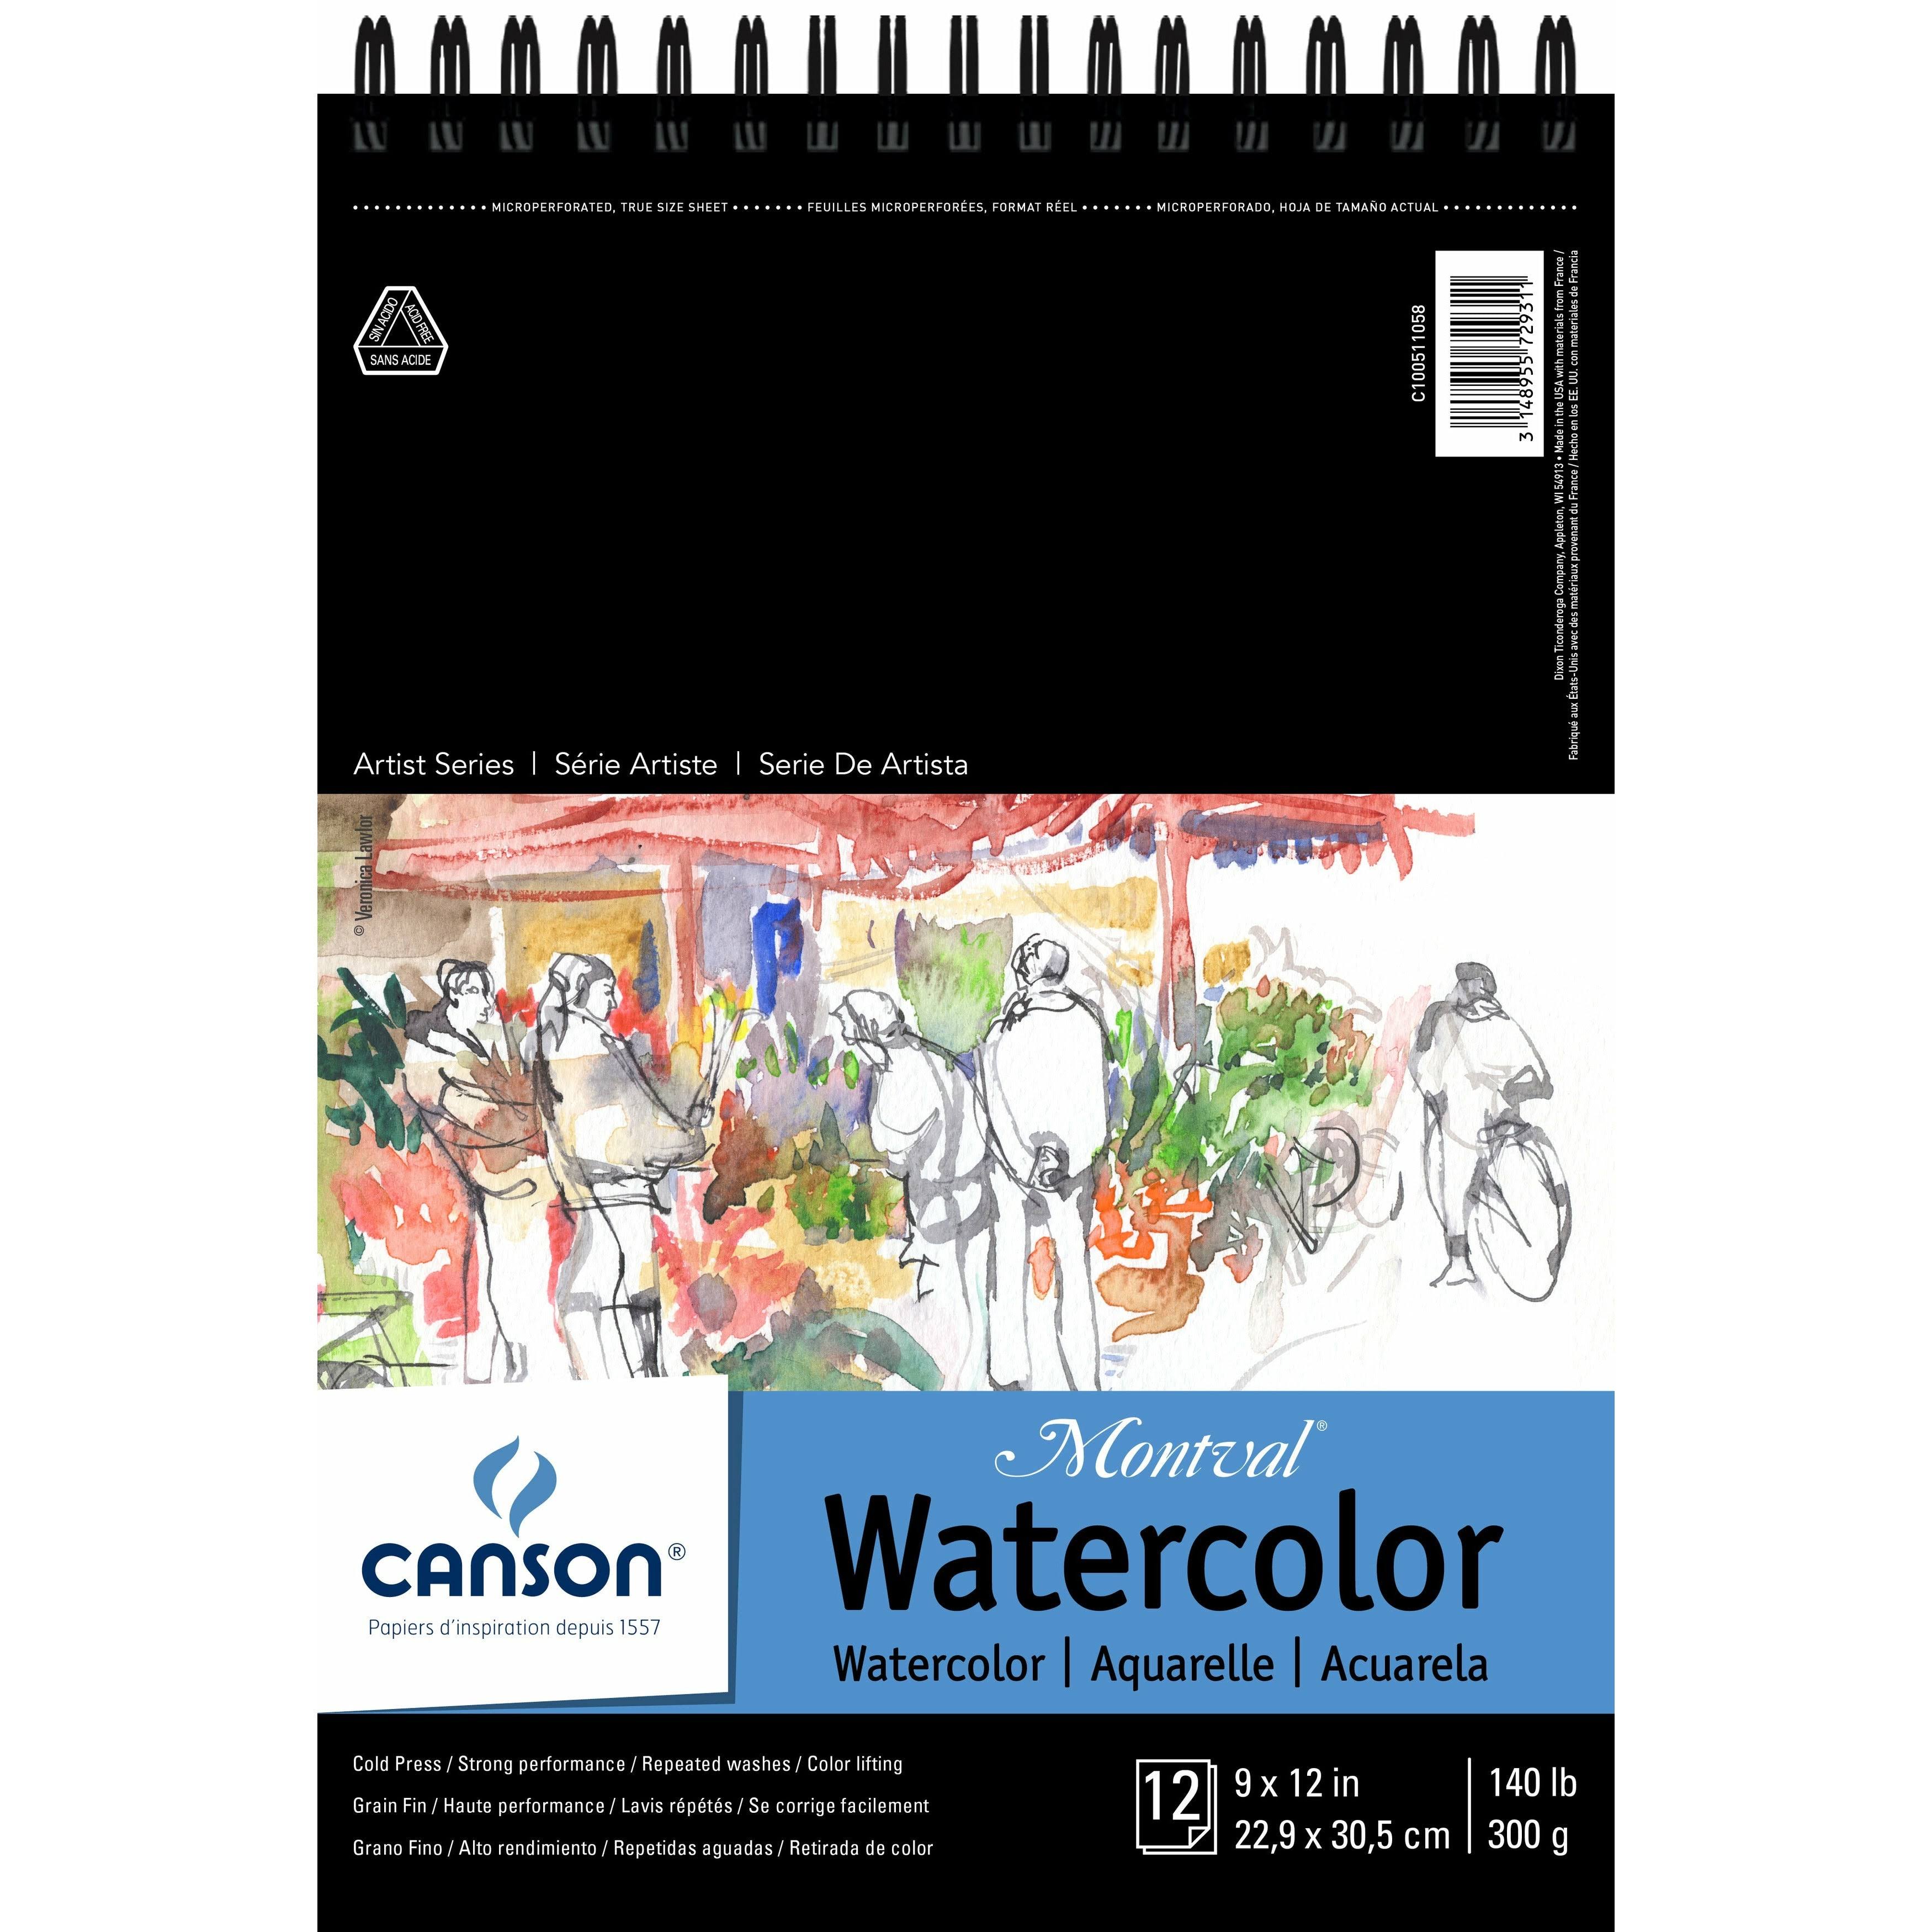 Canson Top Spiral Bound Watercolor Pad - 12 Sheets, 9" X 12"